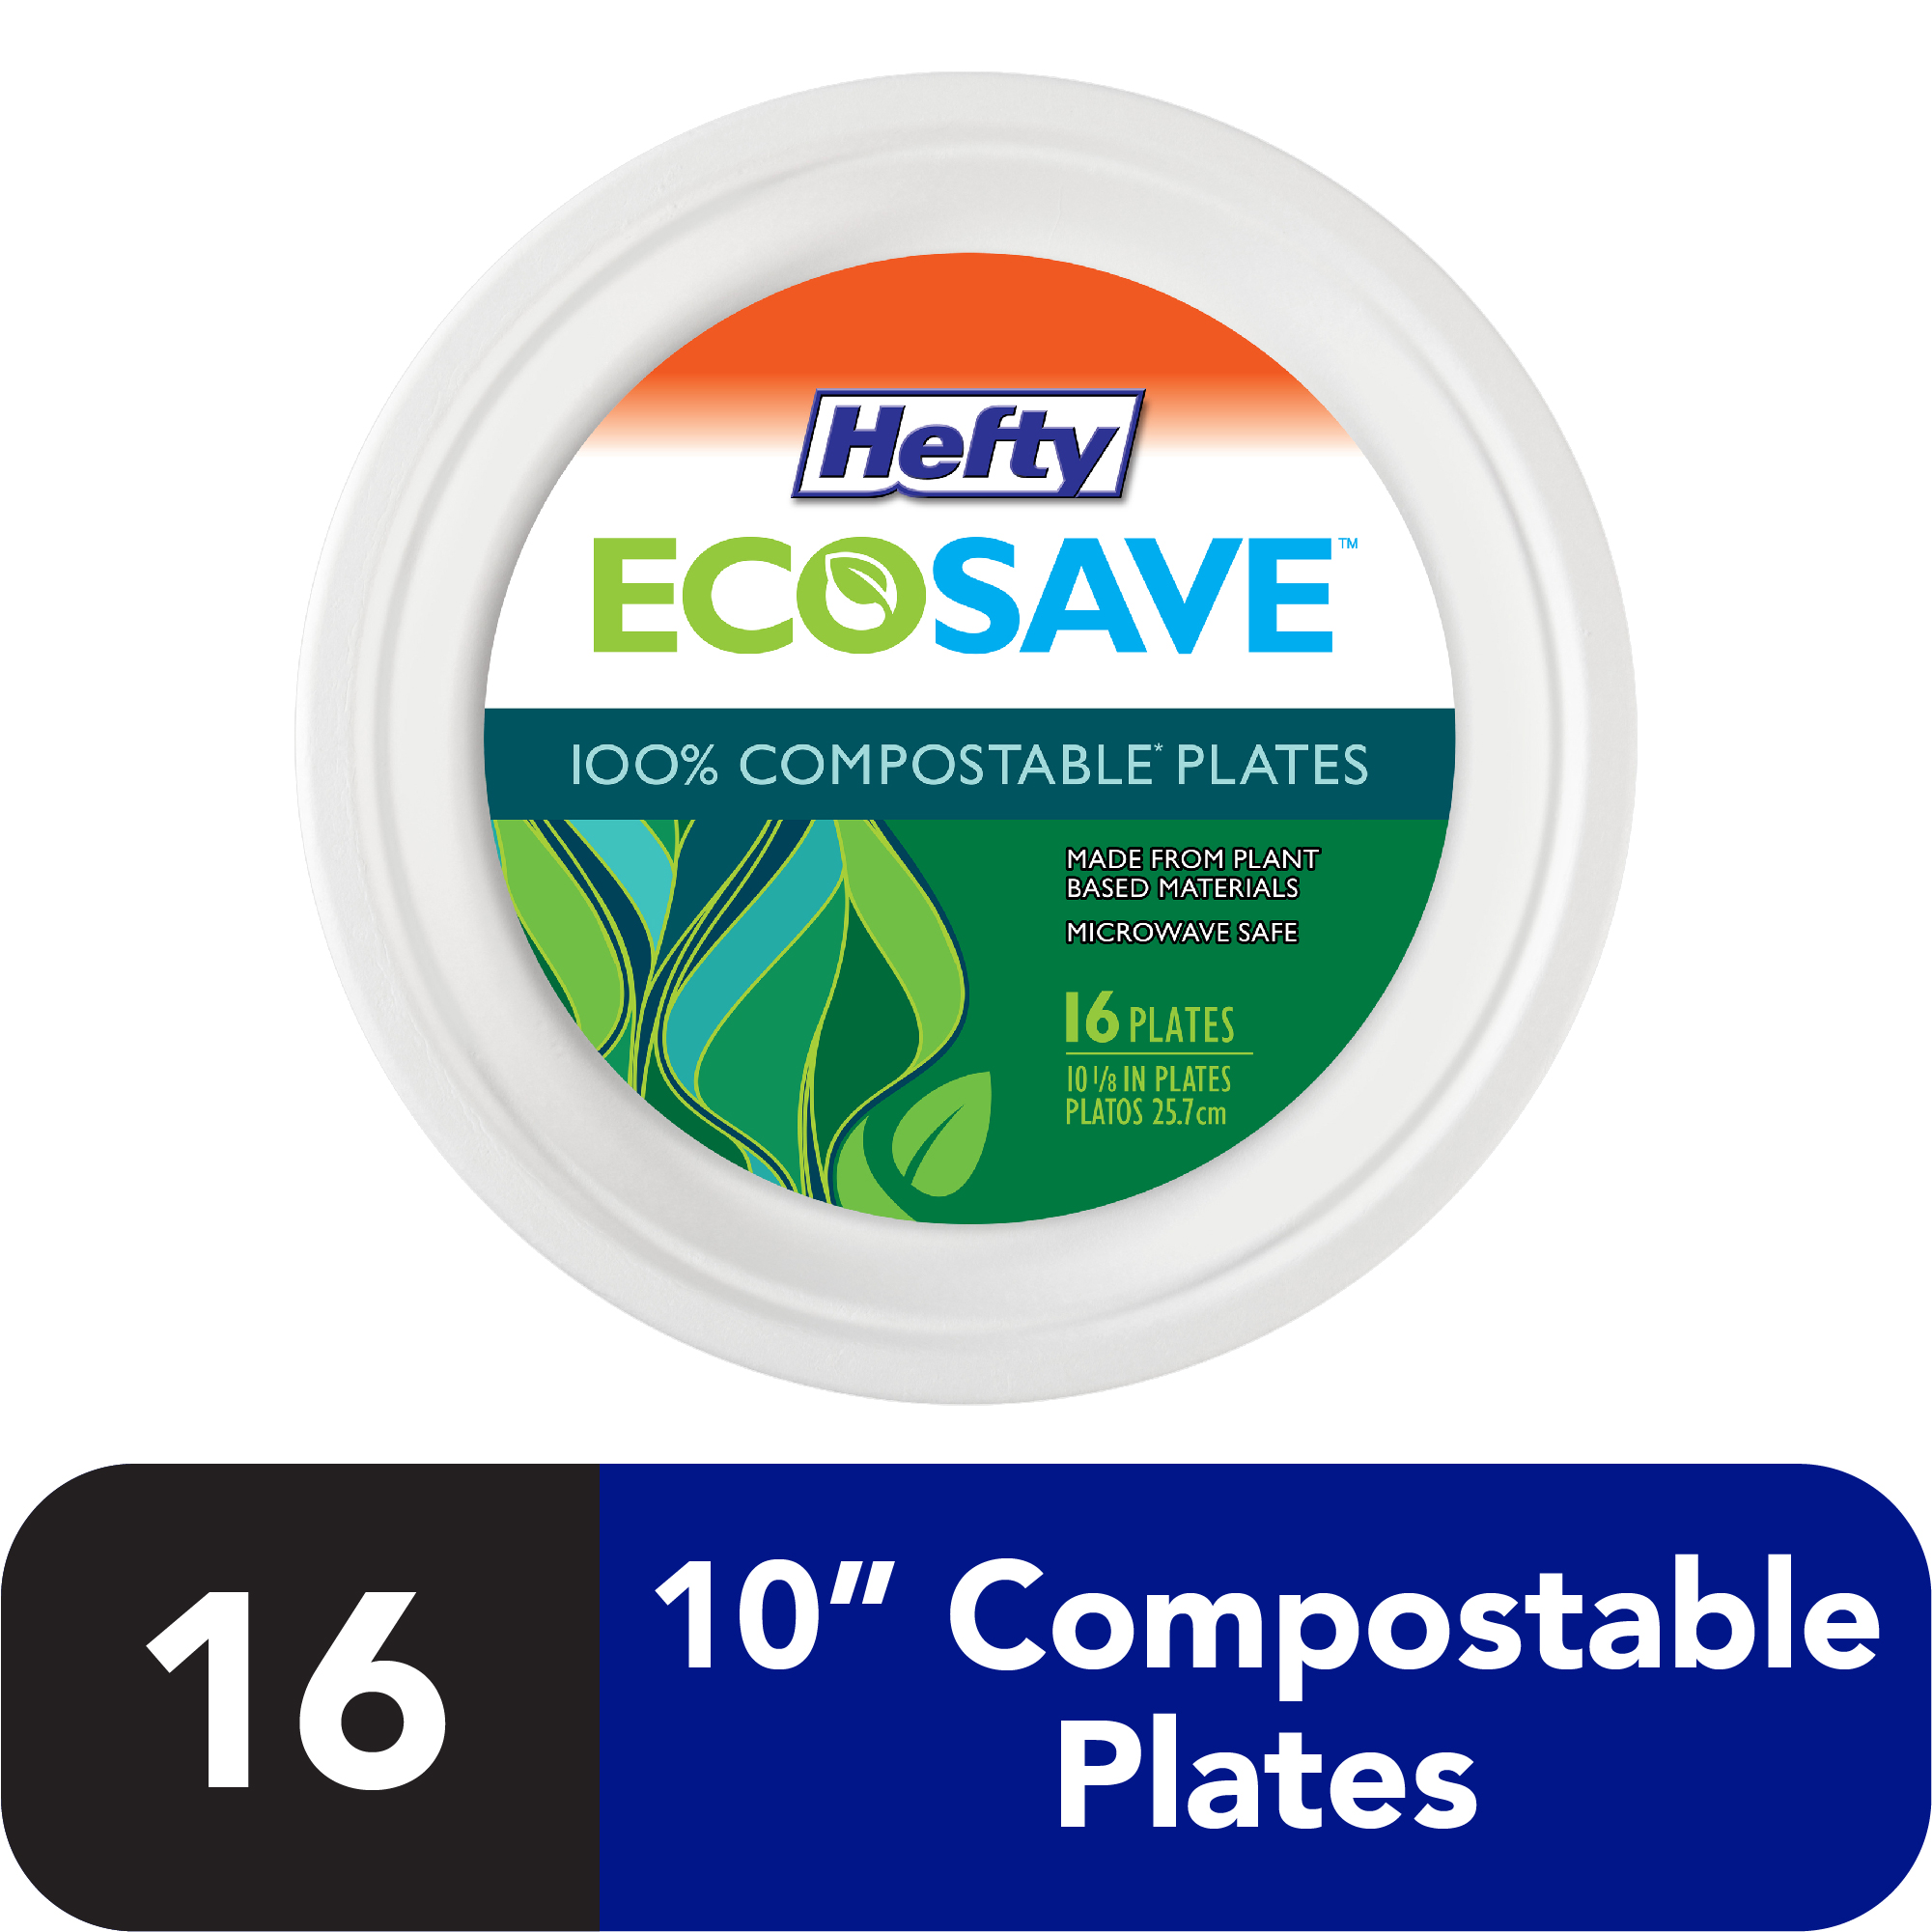 Hefty ECOSAVE Compostable Paper Plates, 10 1/8 Inch, 16 Count - image 1 of 9